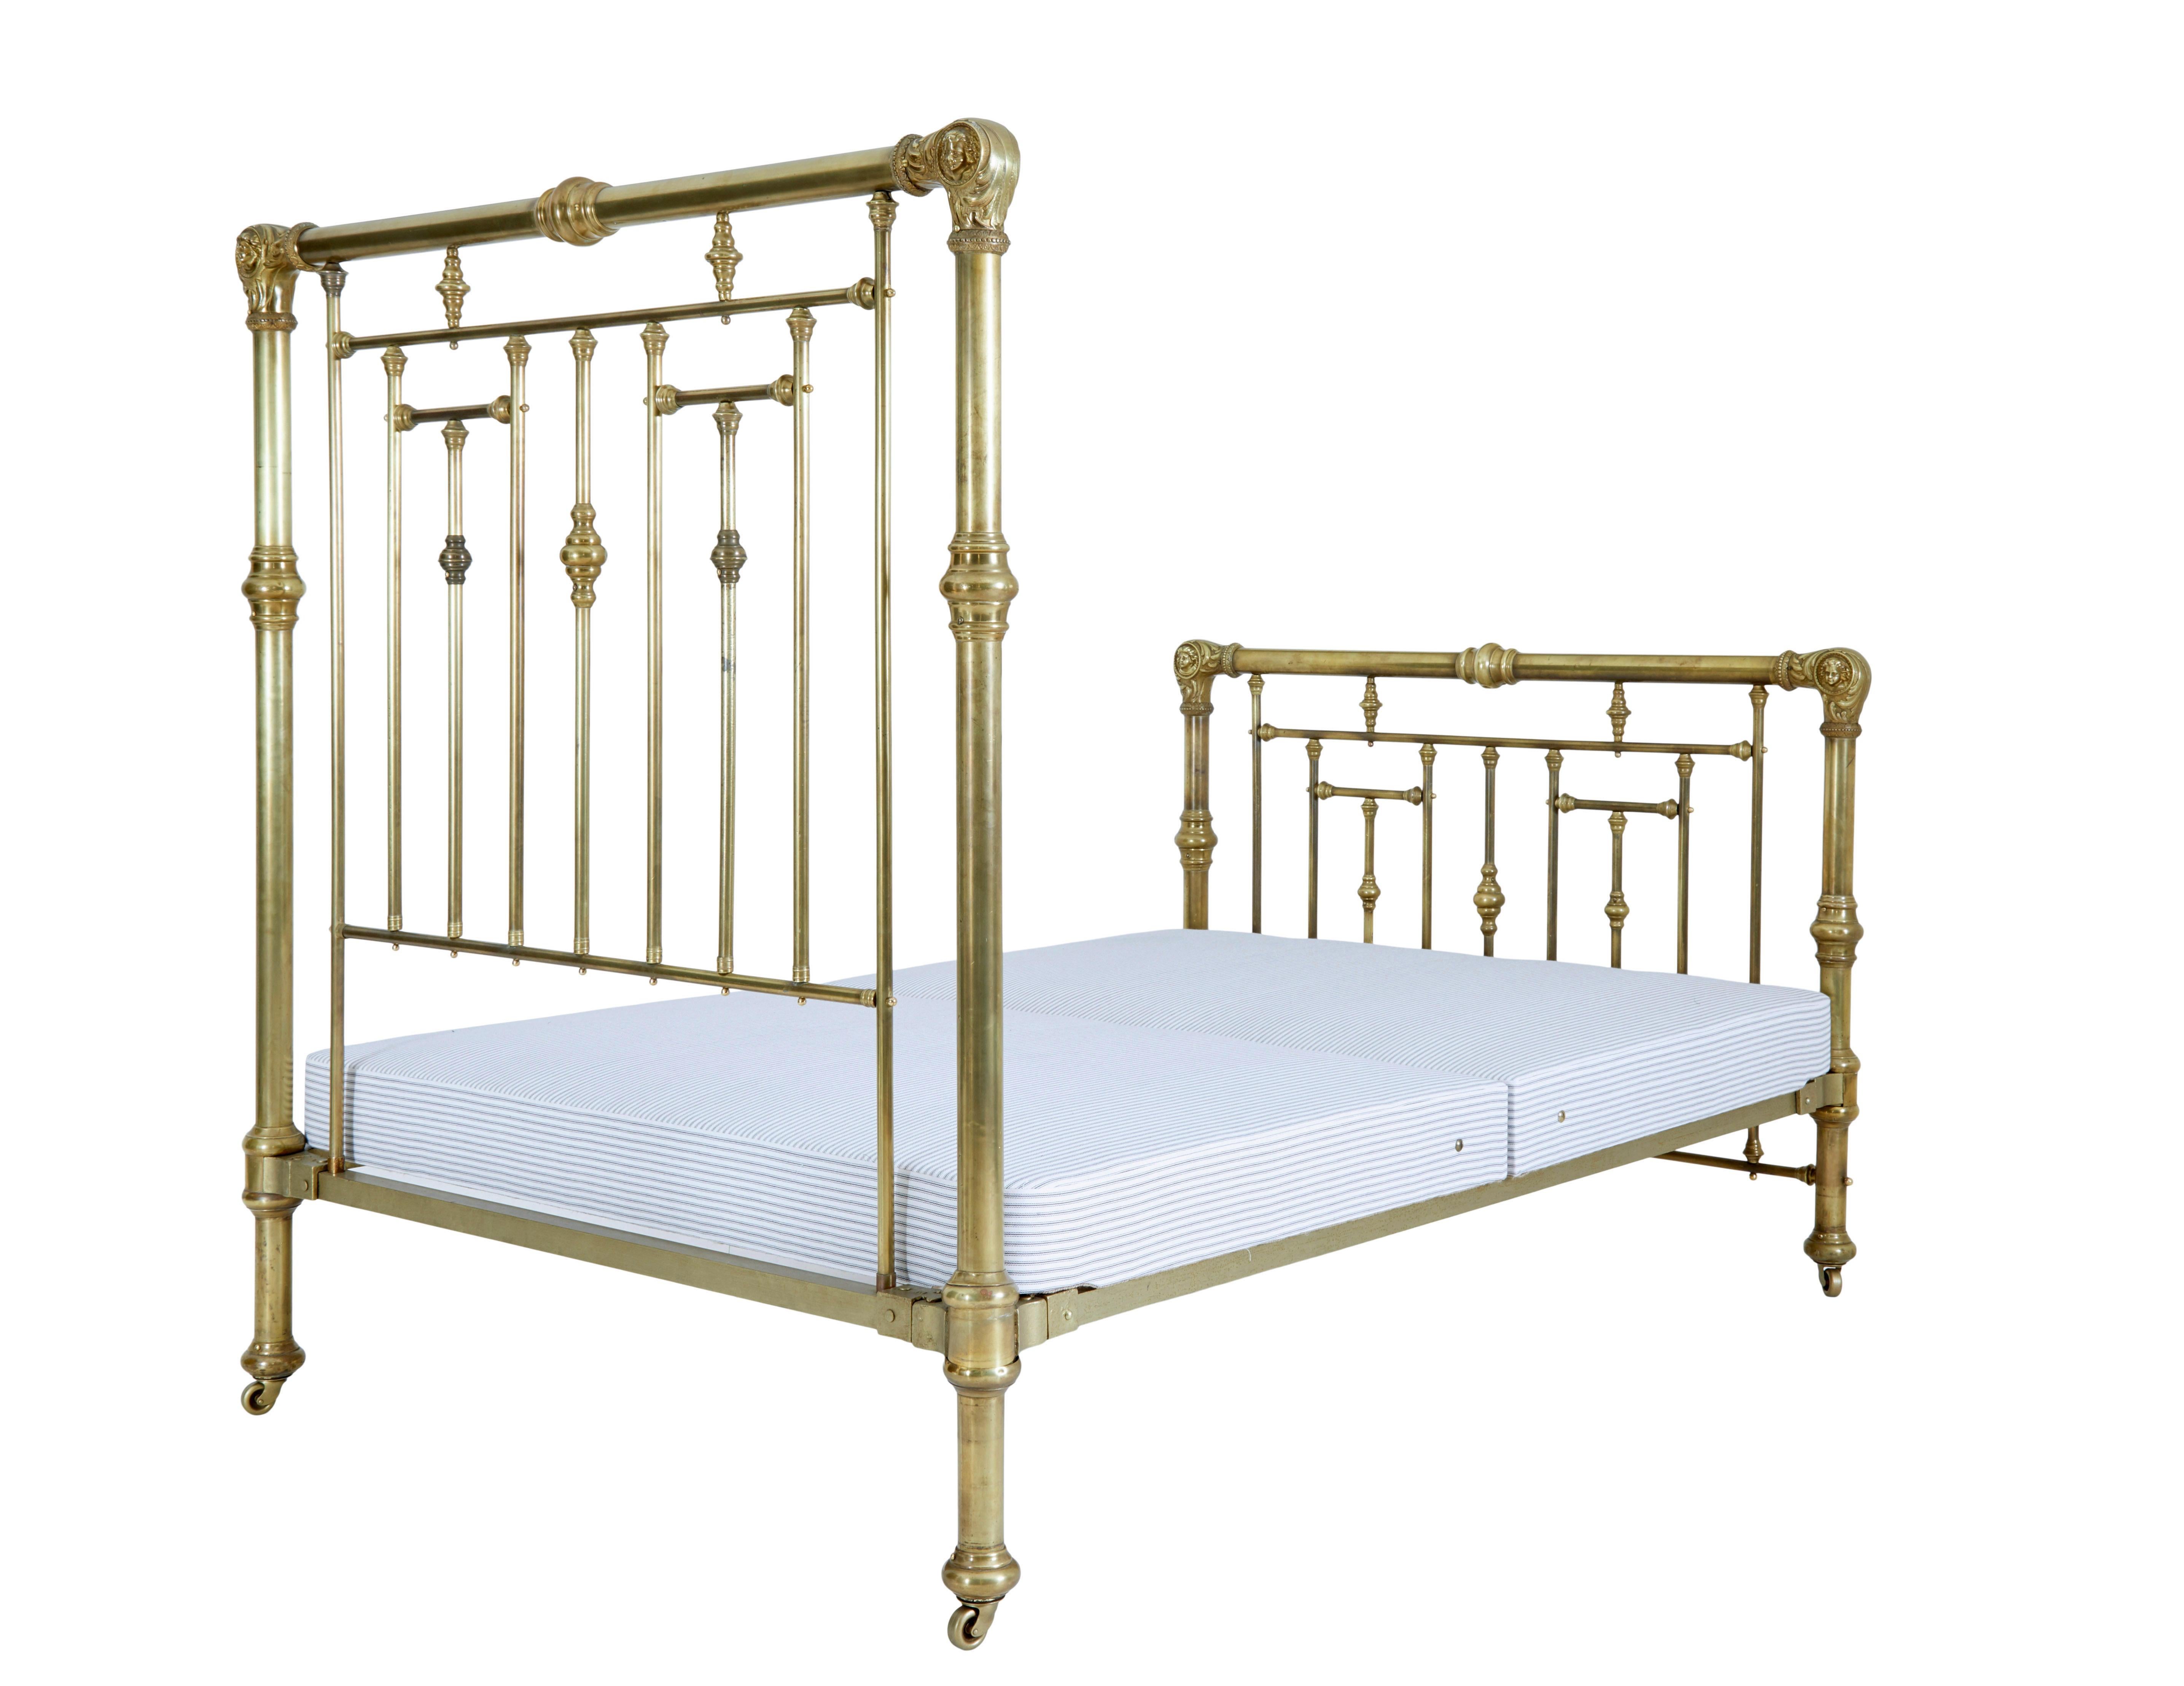 Victorian American 19th Century Ornate Brass Double Bed For Sale